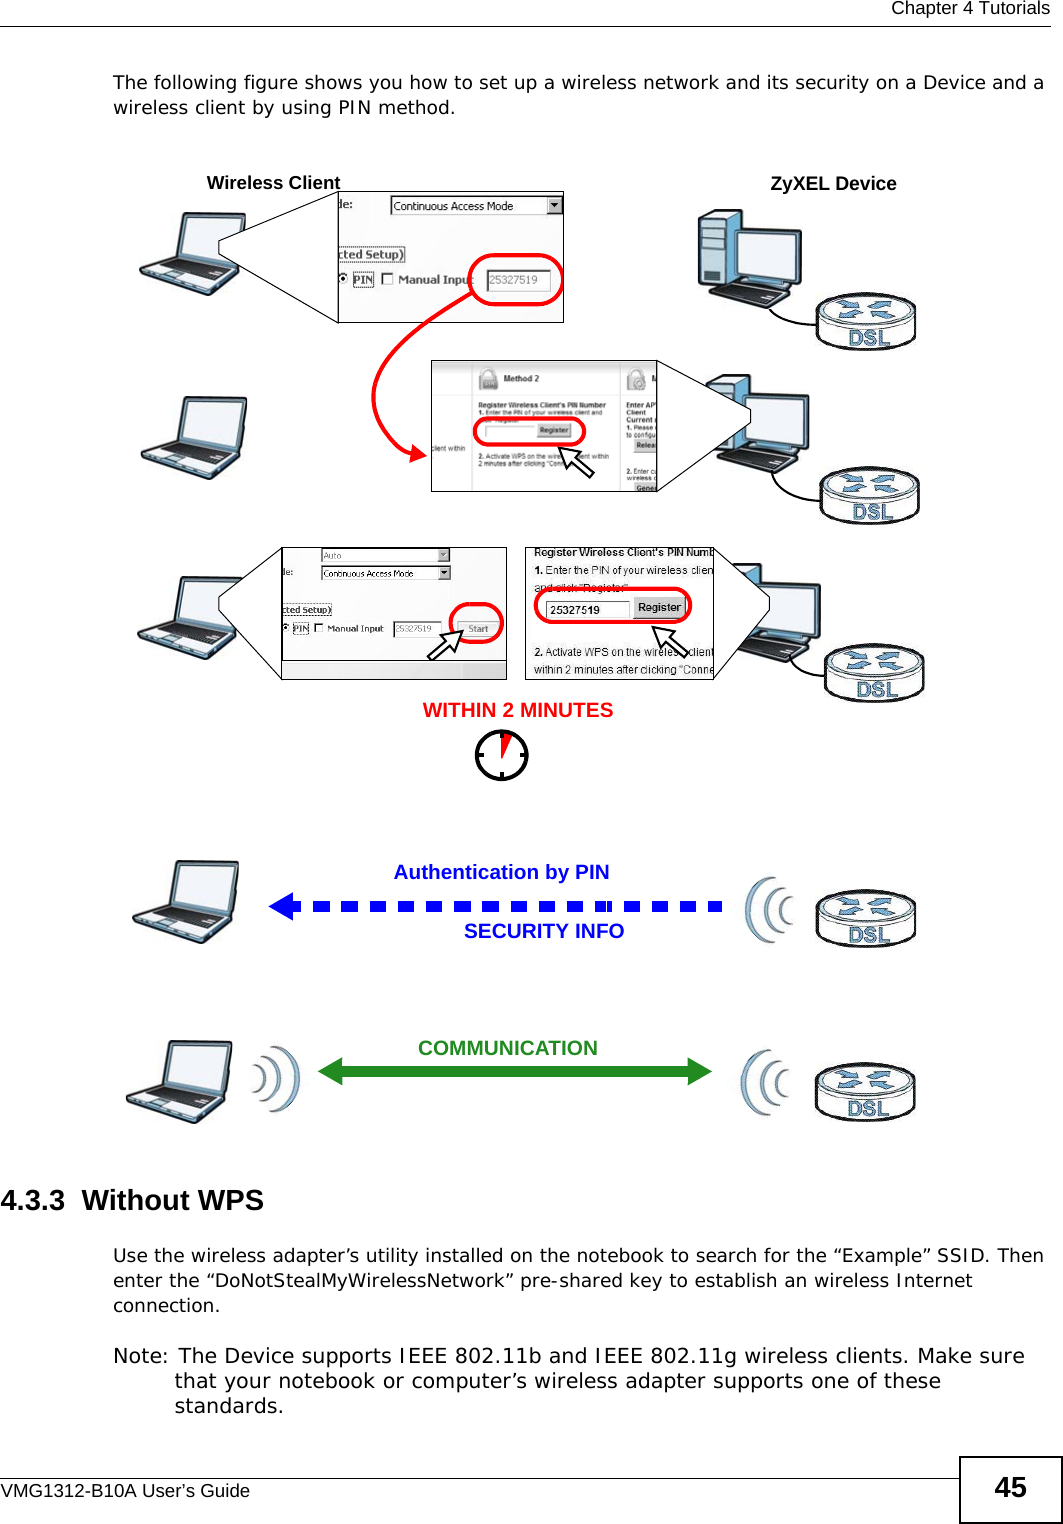  Chapter 4 TutorialsVMG1312-B10A User’s Guide 45The following figure shows you how to set up a wireless network and its security on a Device and a wireless client by using PIN method. Example WPS Process: PIN Method4.3.3  Without WPSUse the wireless adapter’s utility installed on the notebook to search for the “Example” SSID. Then enter the “DoNotStealMyWirelessNetwork” pre-shared key to establish an wireless Internet connection.Note: The Device supports IEEE 802.11b and IEEE 802.11g wireless clients. Make sure that your notebook or computer’s wireless adapter supports one of these standards.Authentication by PINSECURITY INFOWITHIN 2 MINUTESWireless ClientZyXEL DeviceCOMMUNICATION